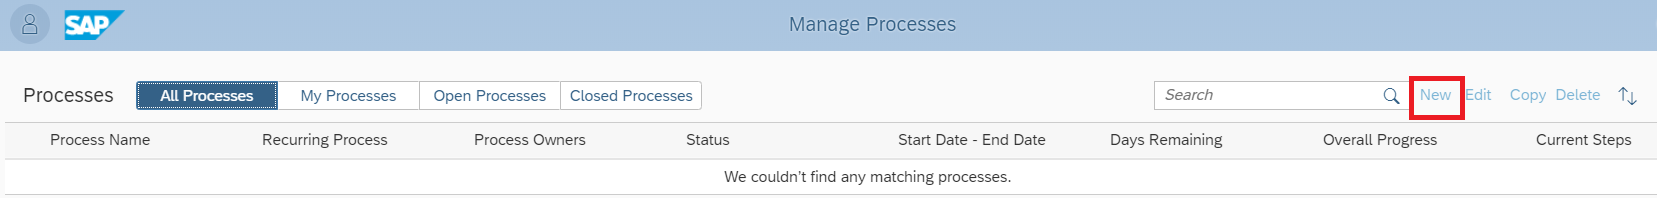 Manage Processes.PNG